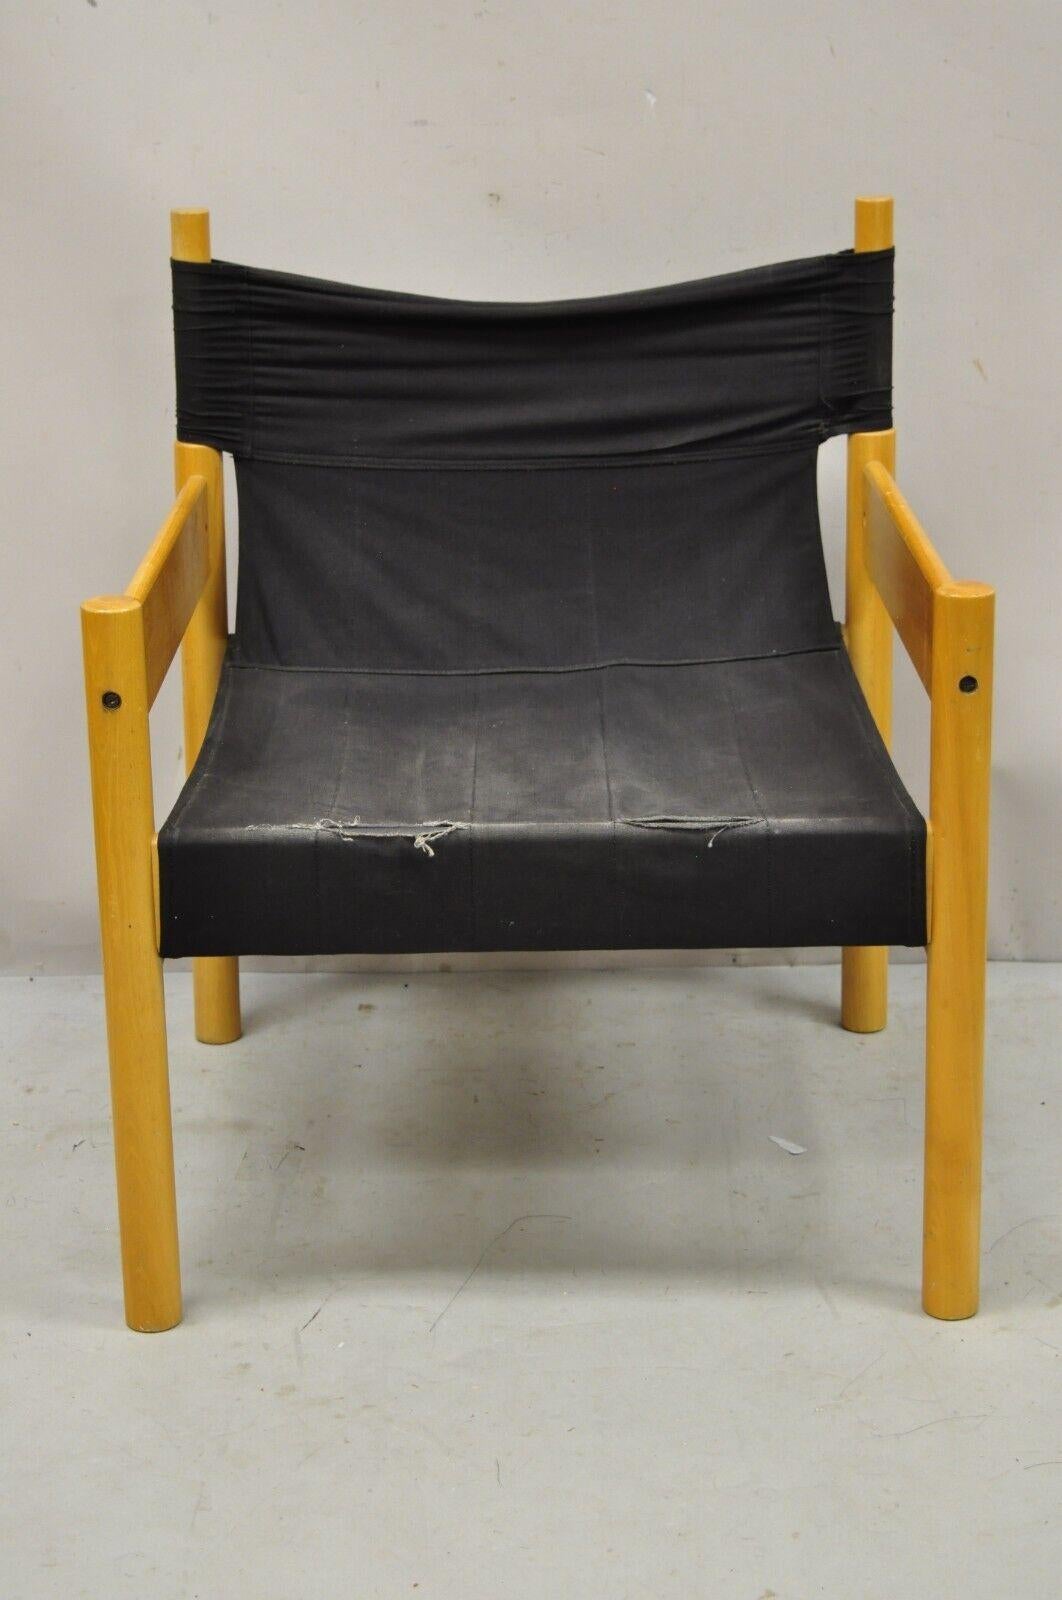 Vintage Scandinavian Modern birch wood lounge chair with black canvas seat. Item features a canvas seat, solid birch wood frame, clean modernist lines, great style and form. Circa mid to late 20th century. Measurements: 29